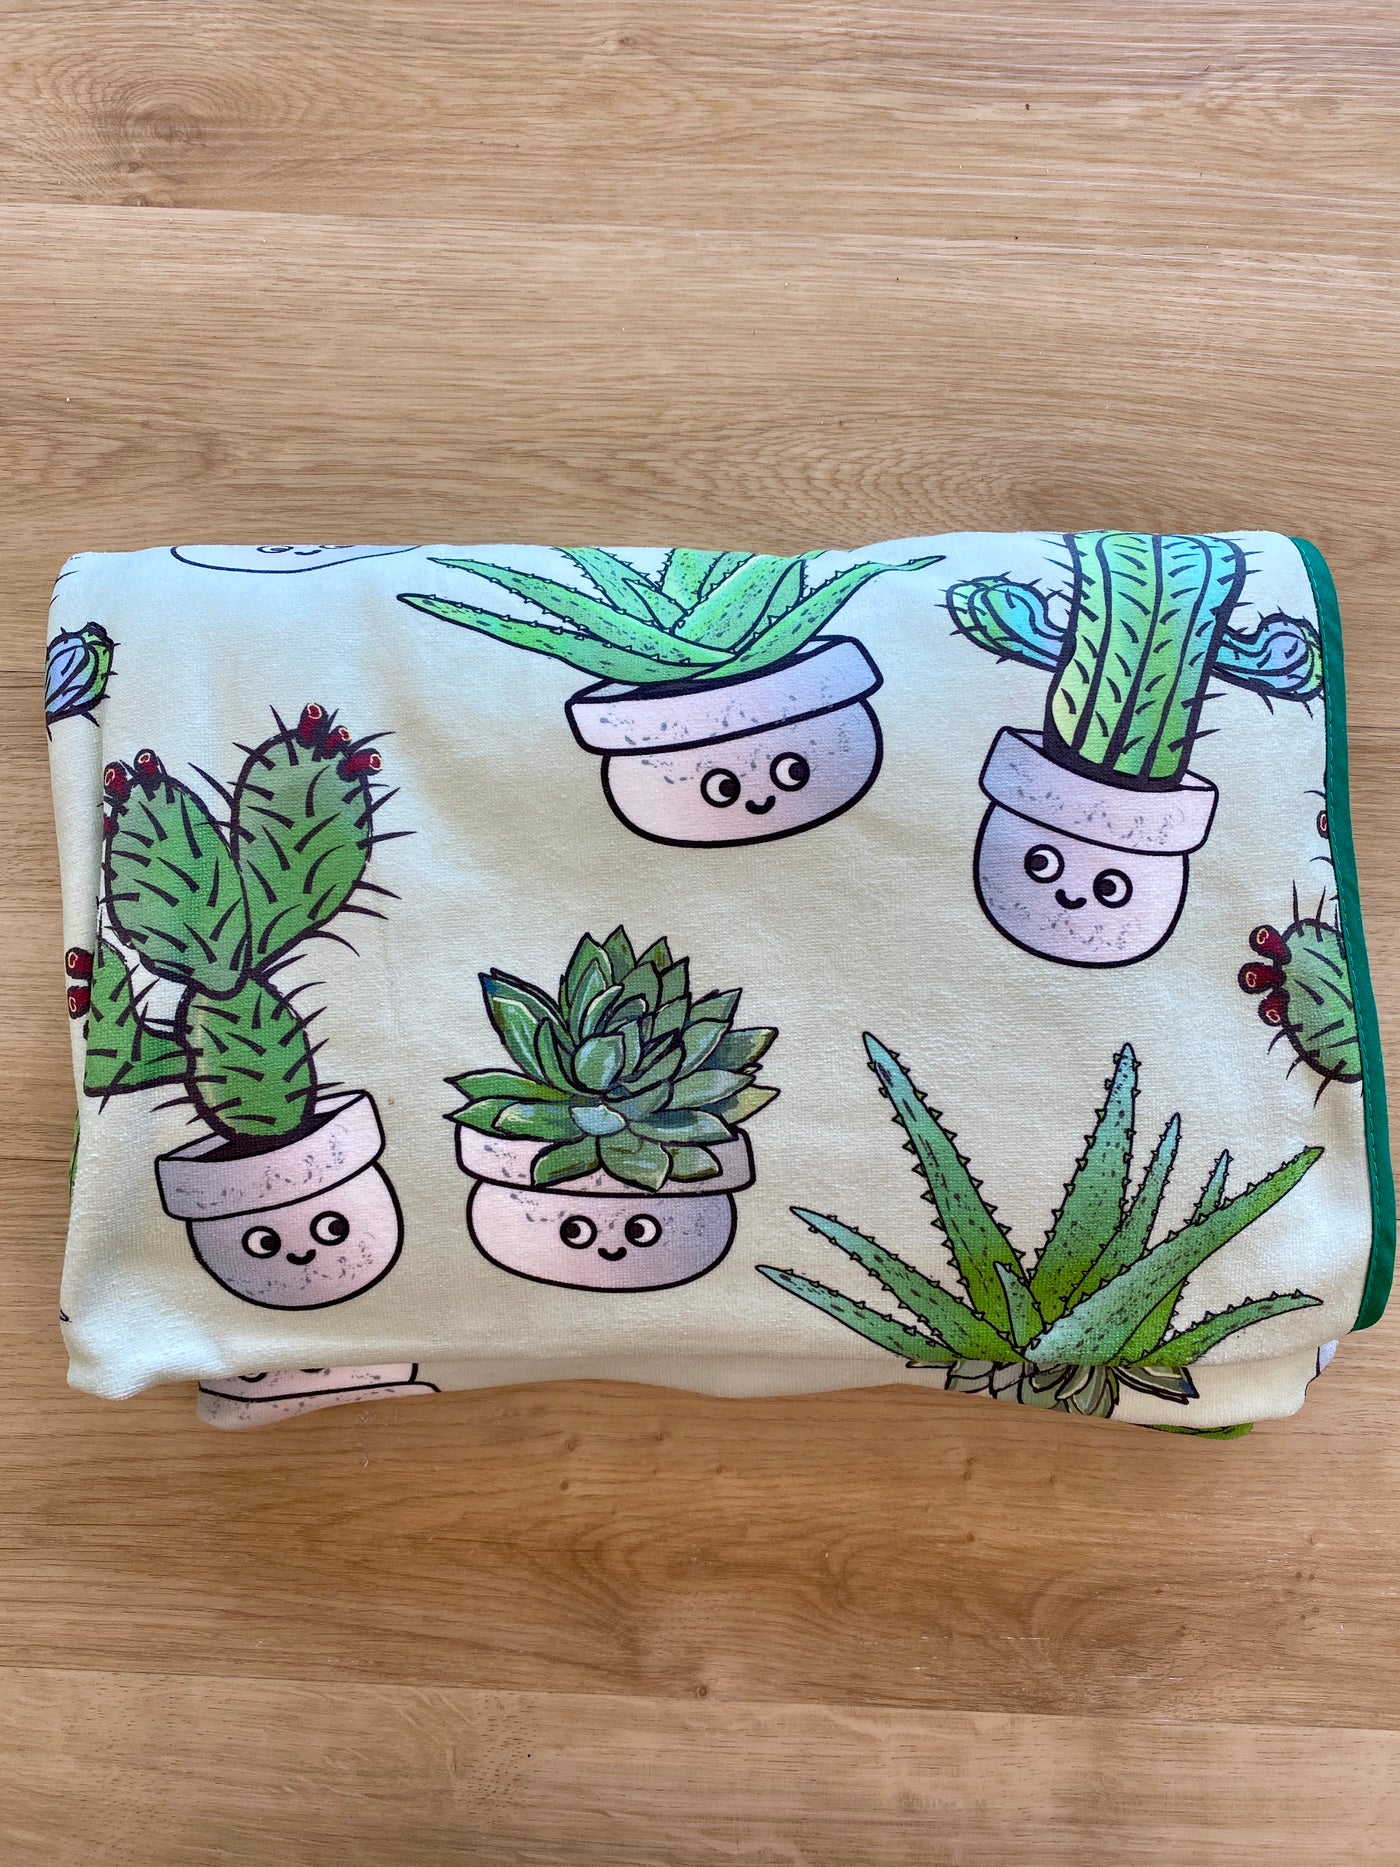 Giant Towel: Soft Cactus and Succulent Plants Sage Green